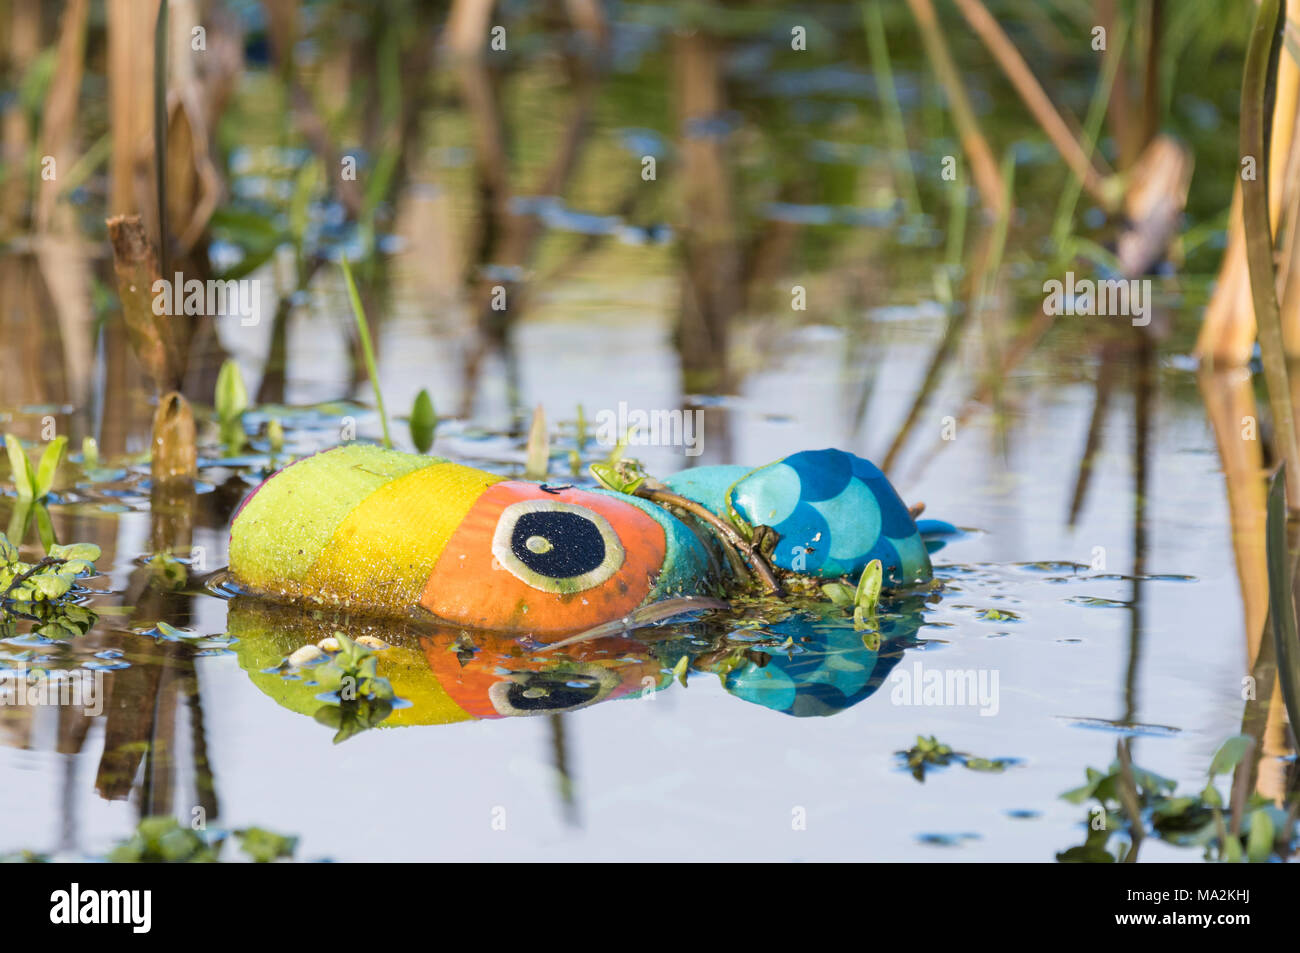 Child's lost stuffed toy abandoned and left behind in water. Stock Photo